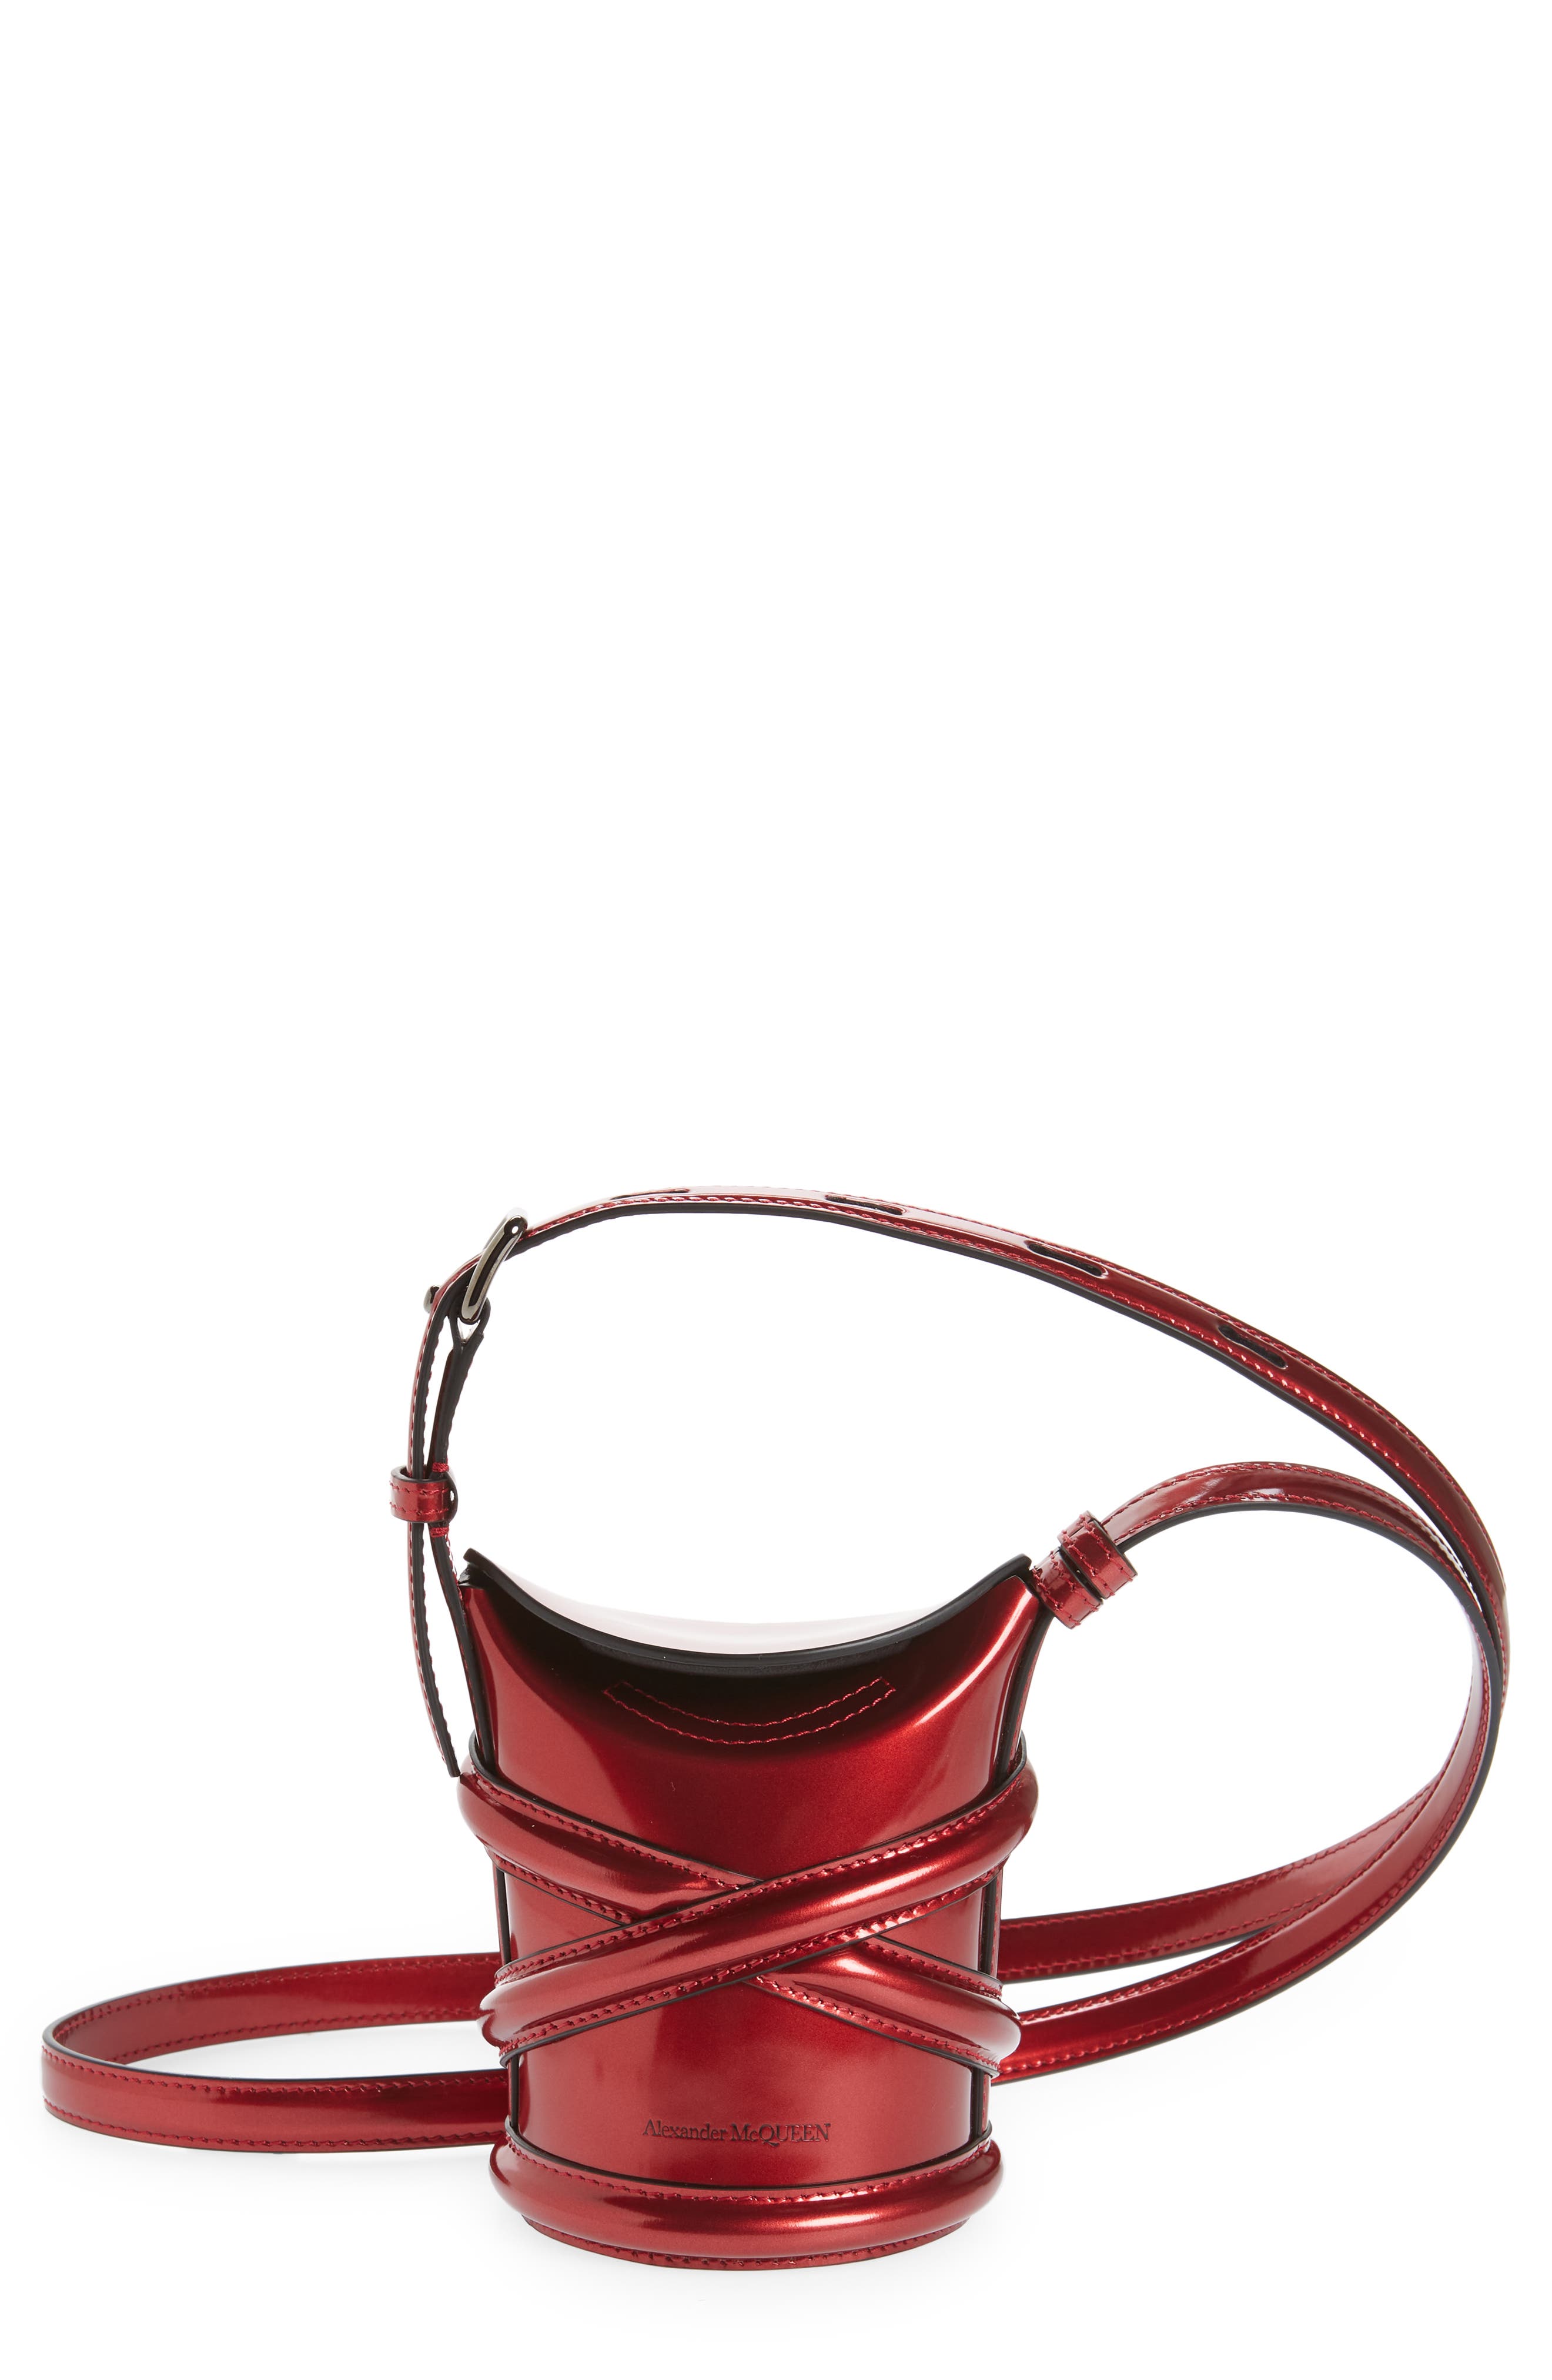 Alexander McQueen Micro The Curve Leather Crossbody Bag in 6501 Red at Nordstrom